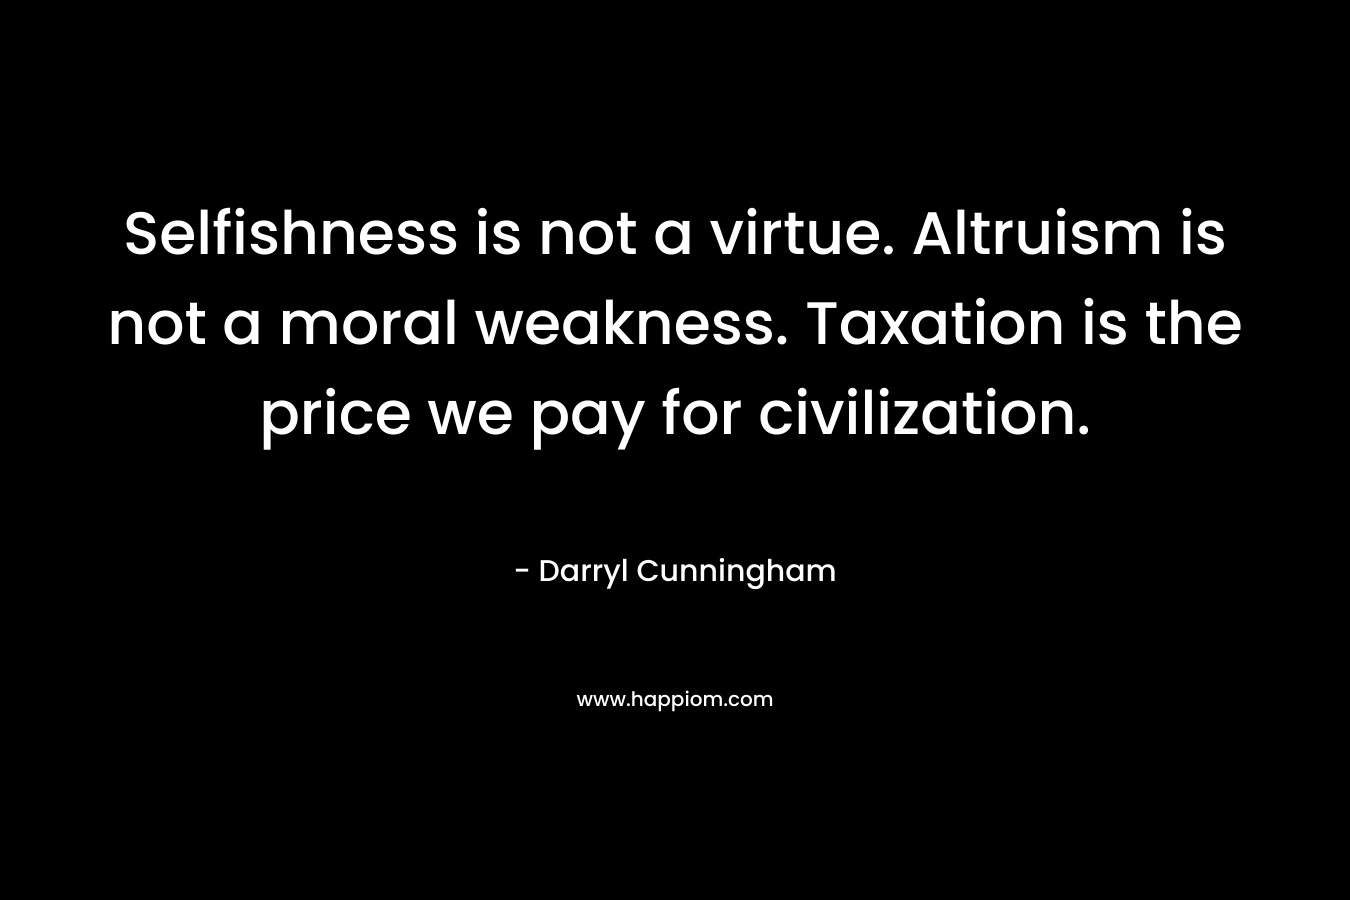 Selfishness is not a virtue. Altruism is not a moral weakness. Taxation is the price we pay for civilization. – Darryl Cunningham